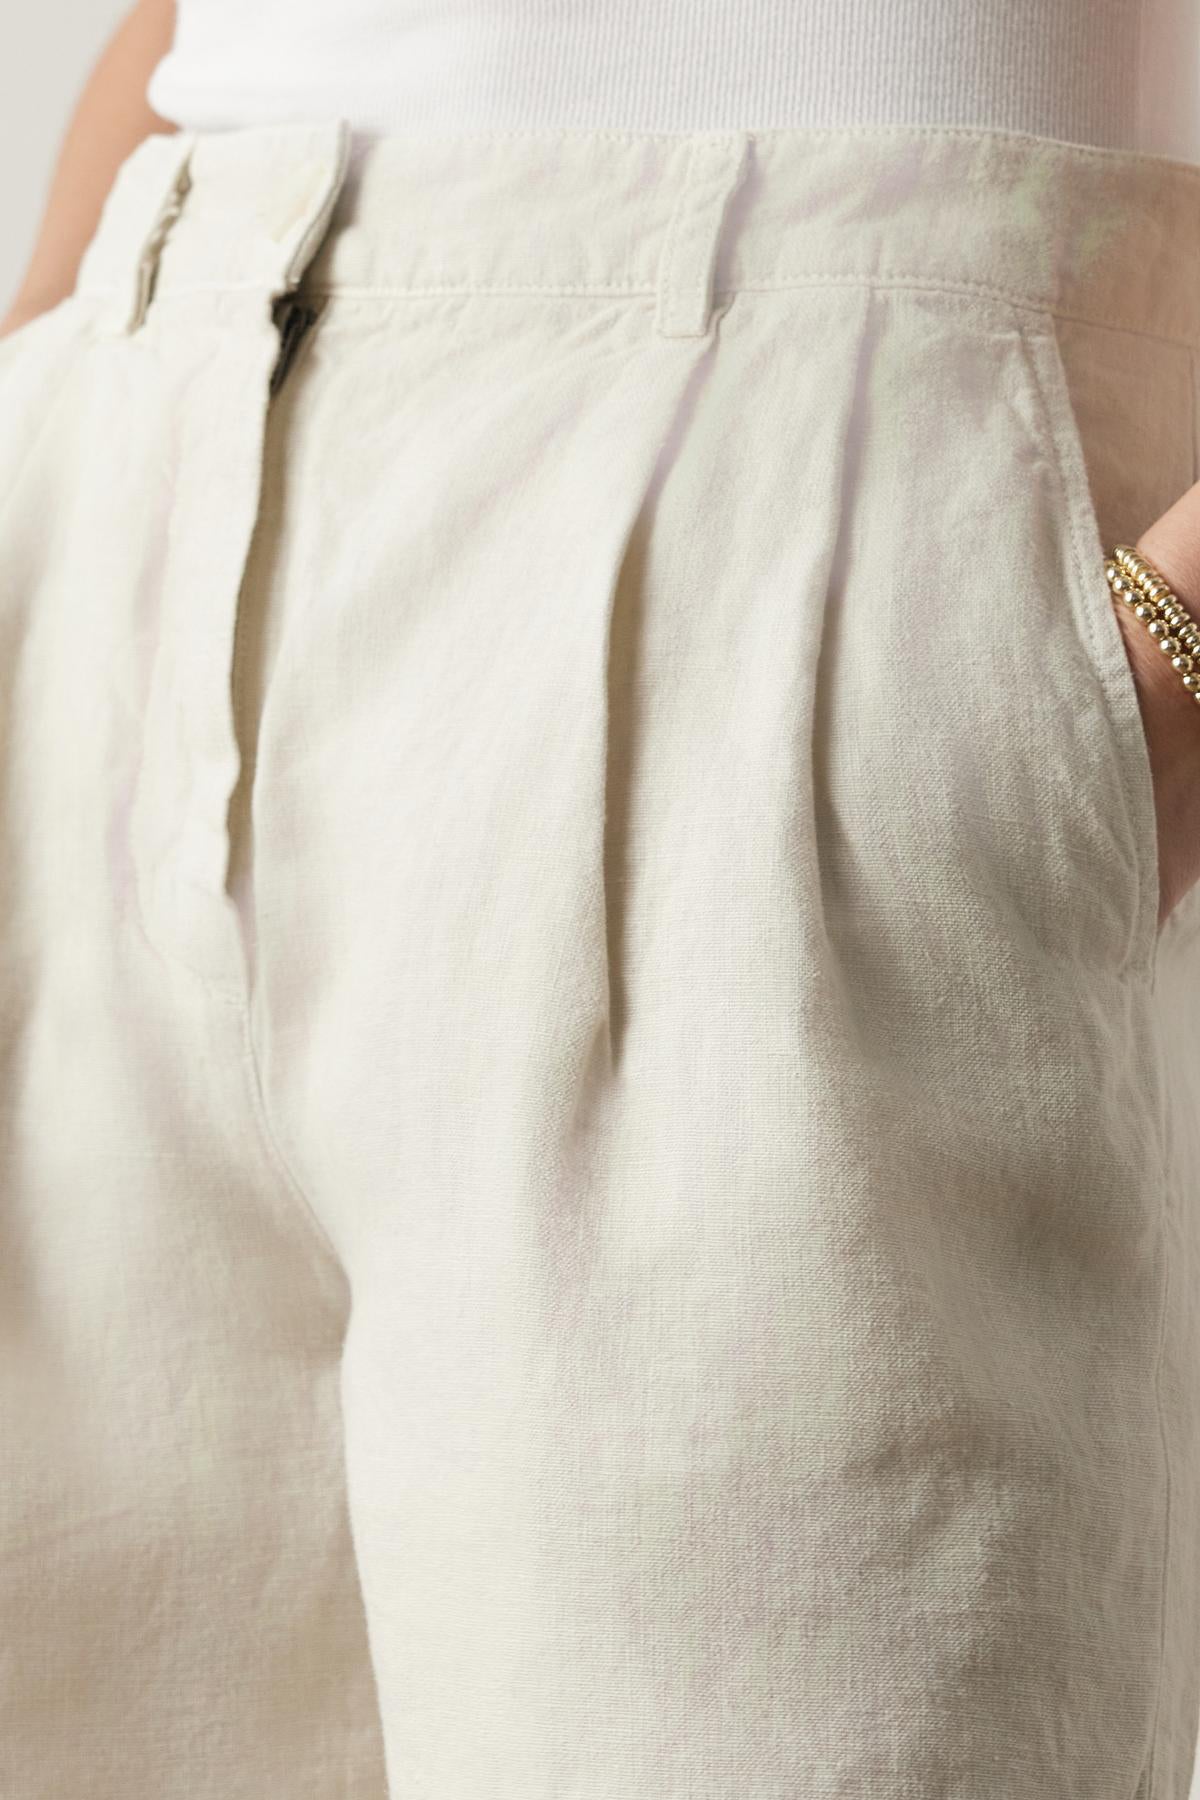 Close-up of a person wearing Velvet by Jenny Graham's LARCHMONT HEAVY LINEN SHORTS and a white top, focusing on the fabric texture and pocket detail.-36890975830209